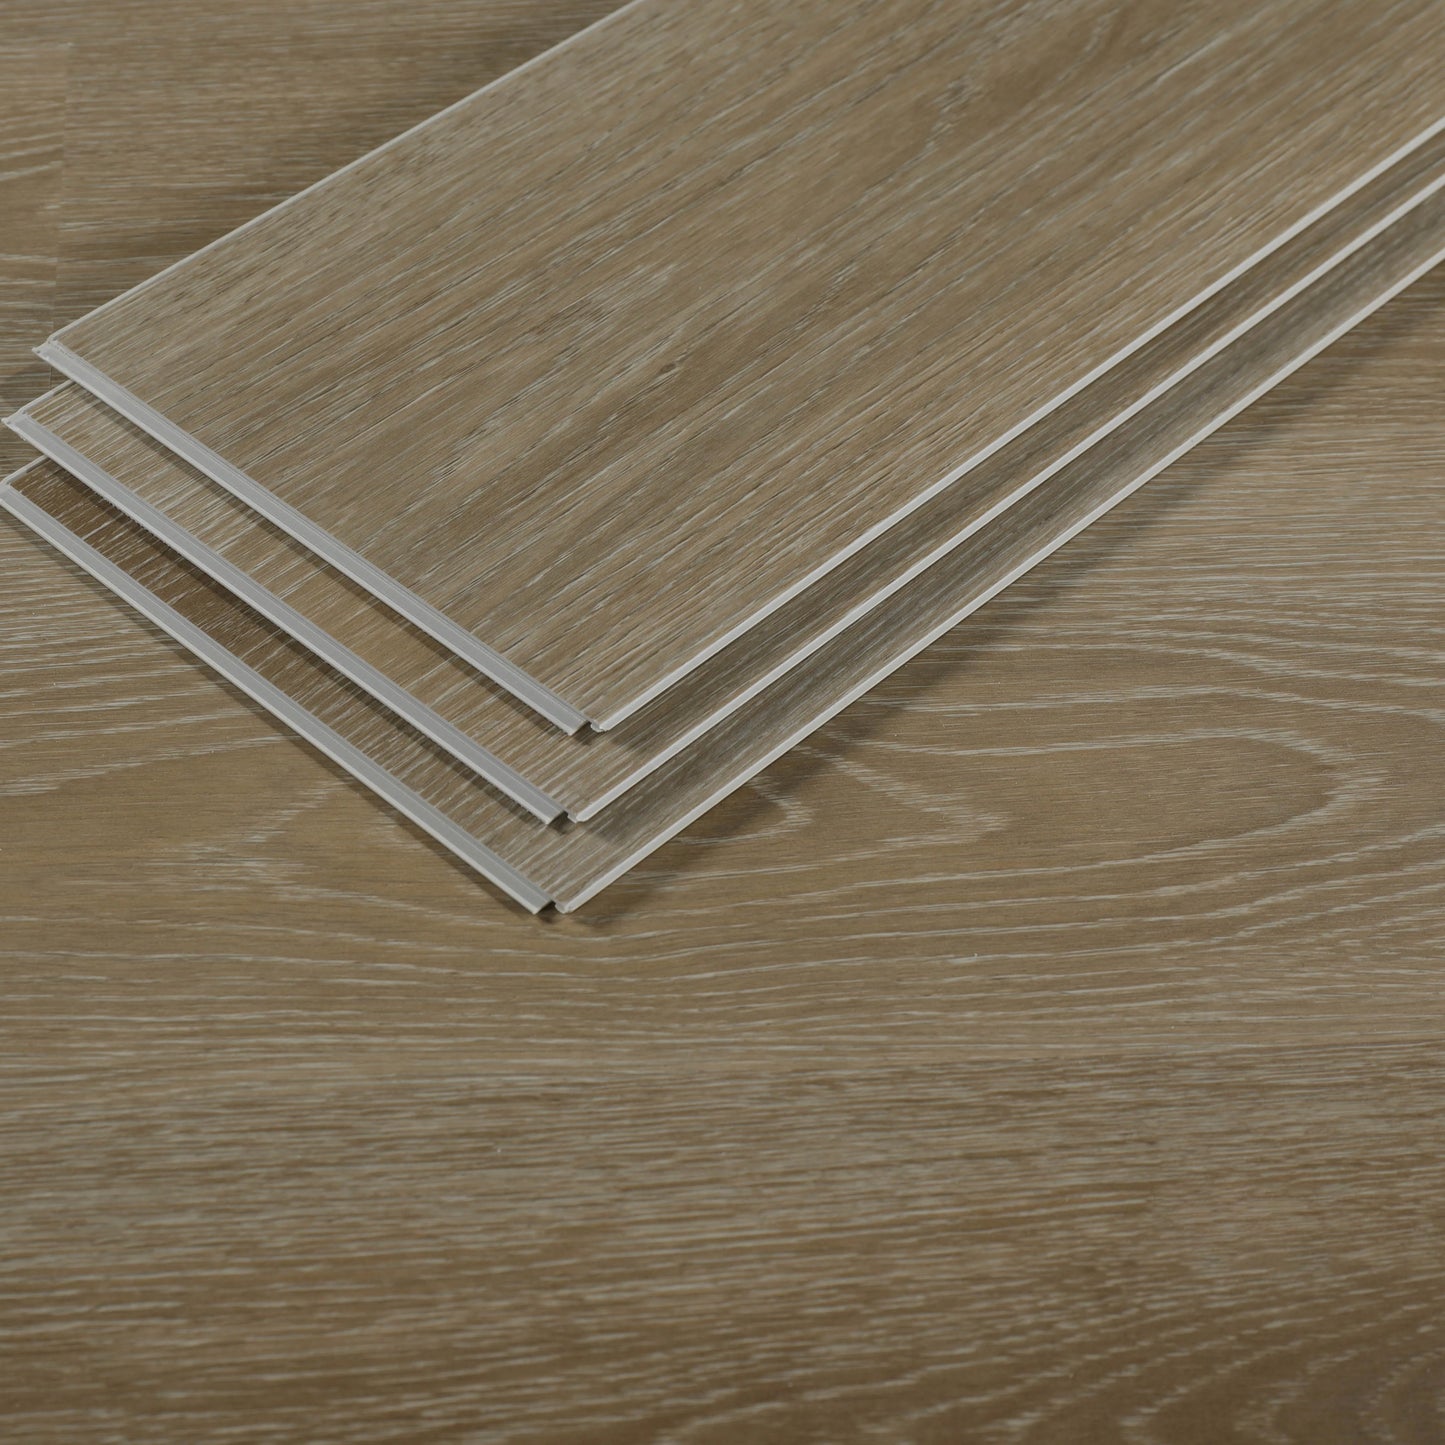 Explore the Beauty and Durability of Wood-Grain SPC Click Flooring